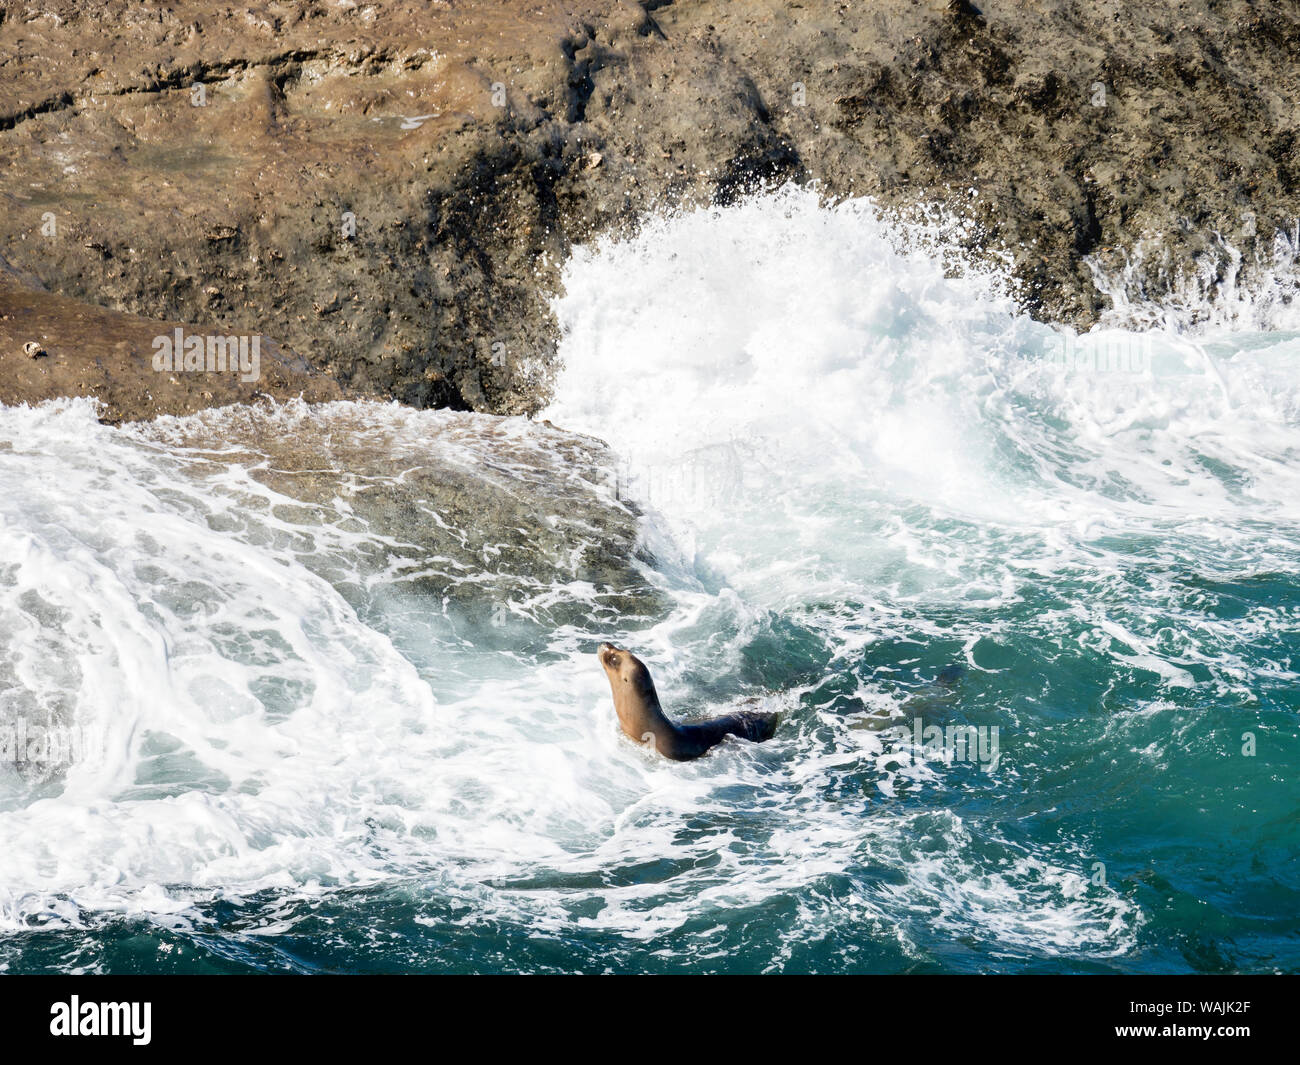 South American sea lion (Otaria flavescens) also called Southern Sea Lion and Patagonian Sea Lion, colony in the Valdes National Park. Valdes is listed as UNESCO World Heritage Site. South America, Argentina, Chubut Stock Photo